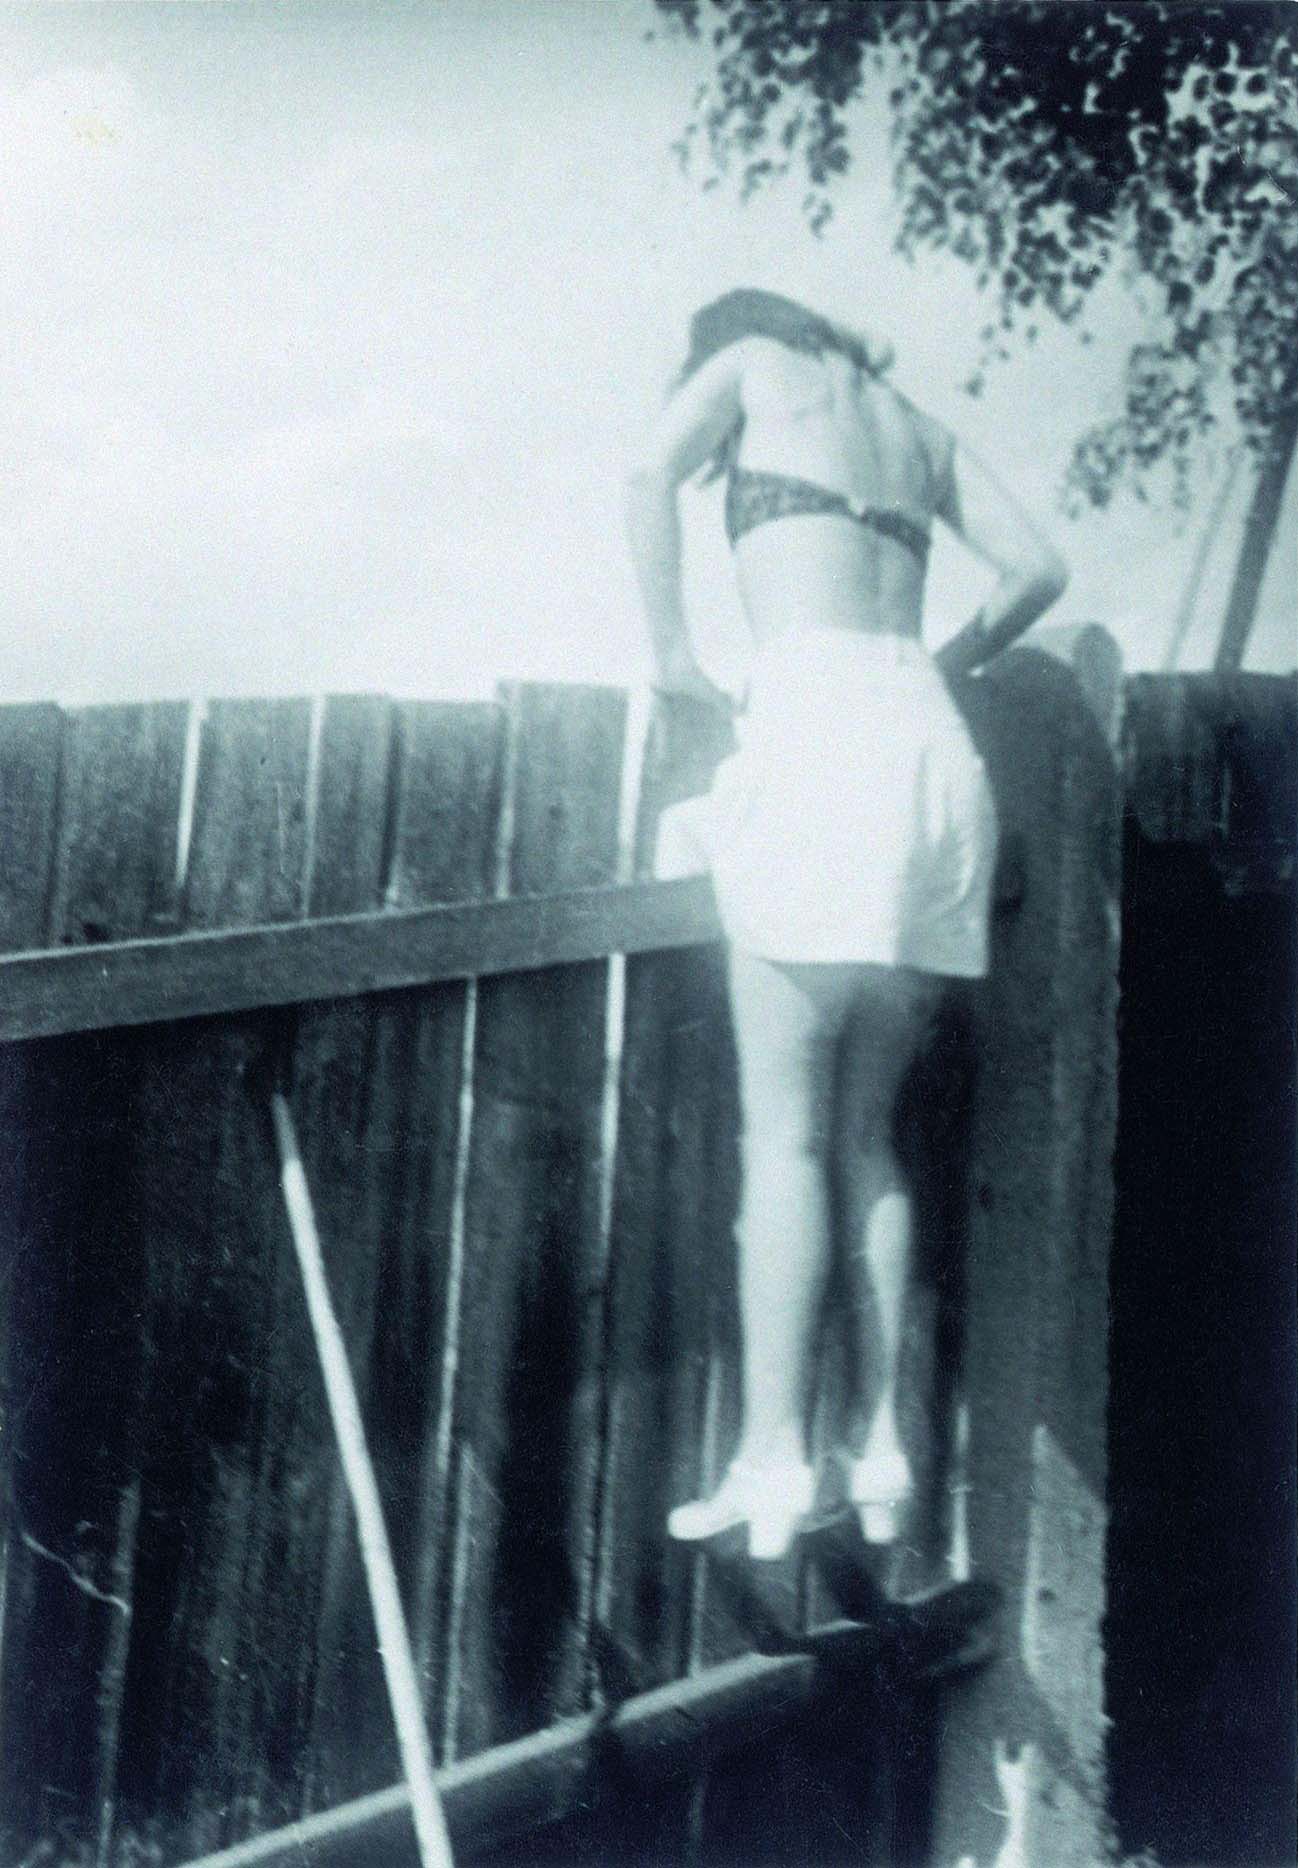 Girl in a short skirt and bikini top climbing over a wooden fence, Germany, 1940.